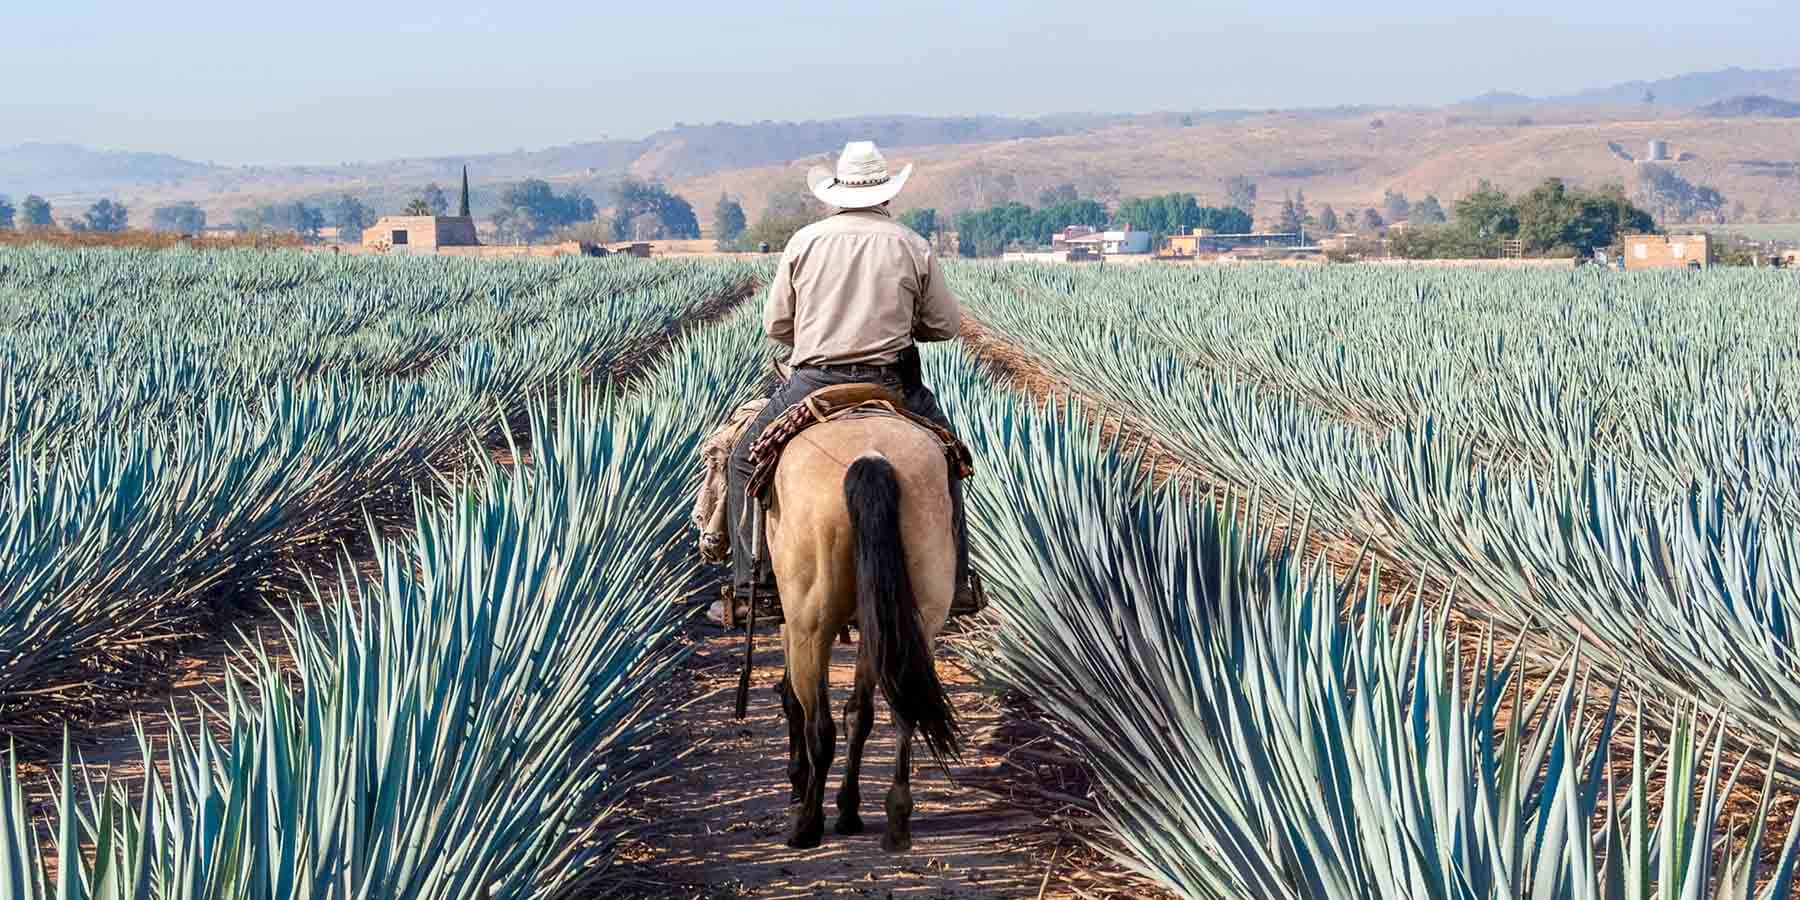 Tequila Blog from your yacht wine supplier